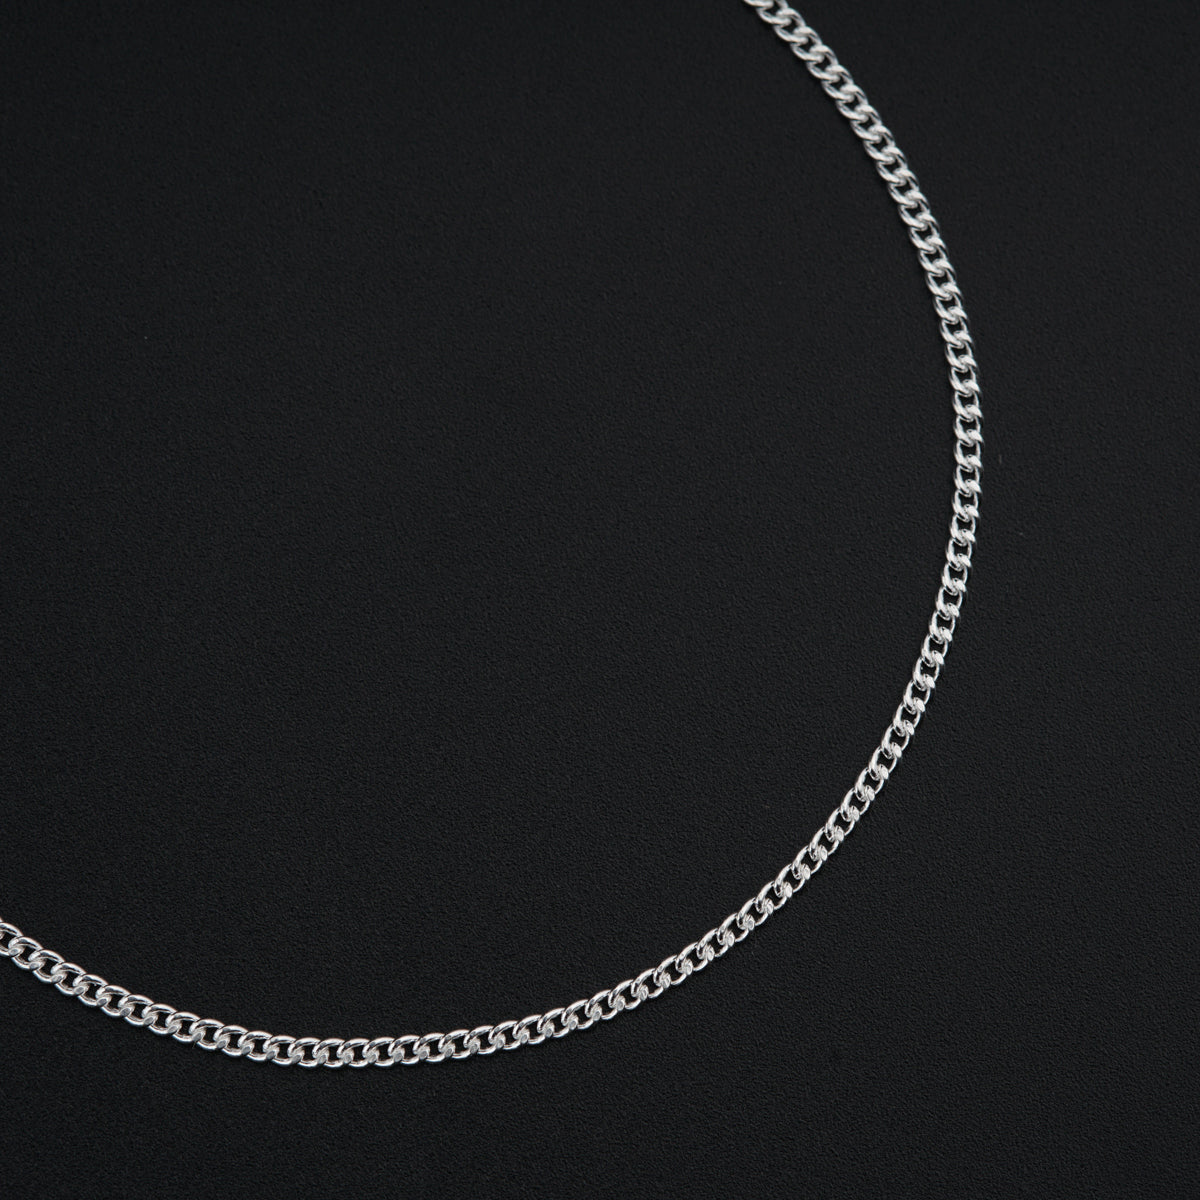 a silver chain on a black background